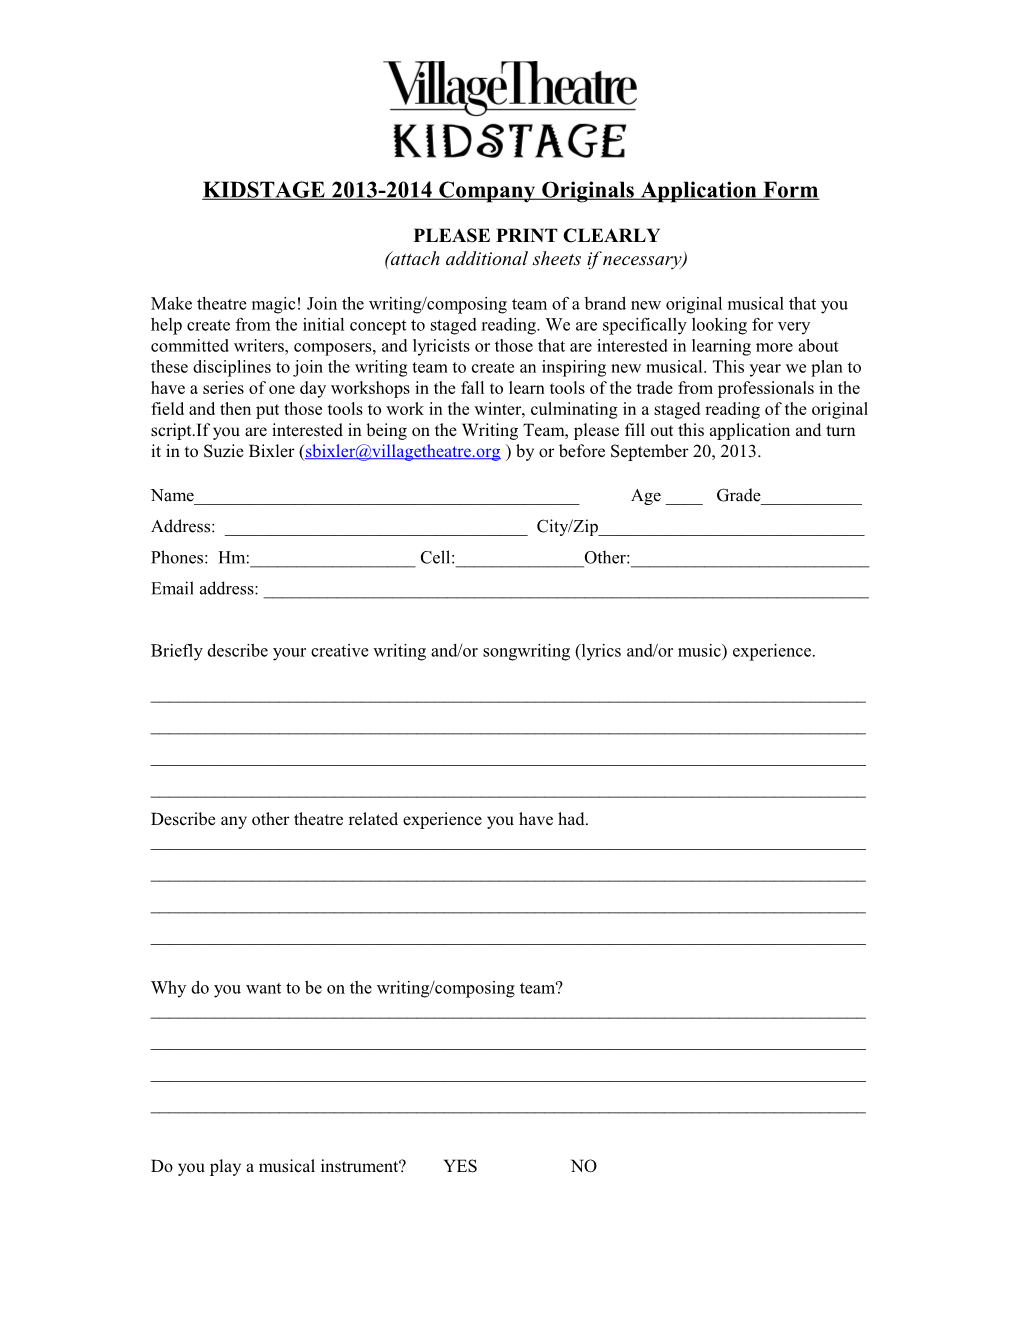 KIDSTAGE Summer Auditions